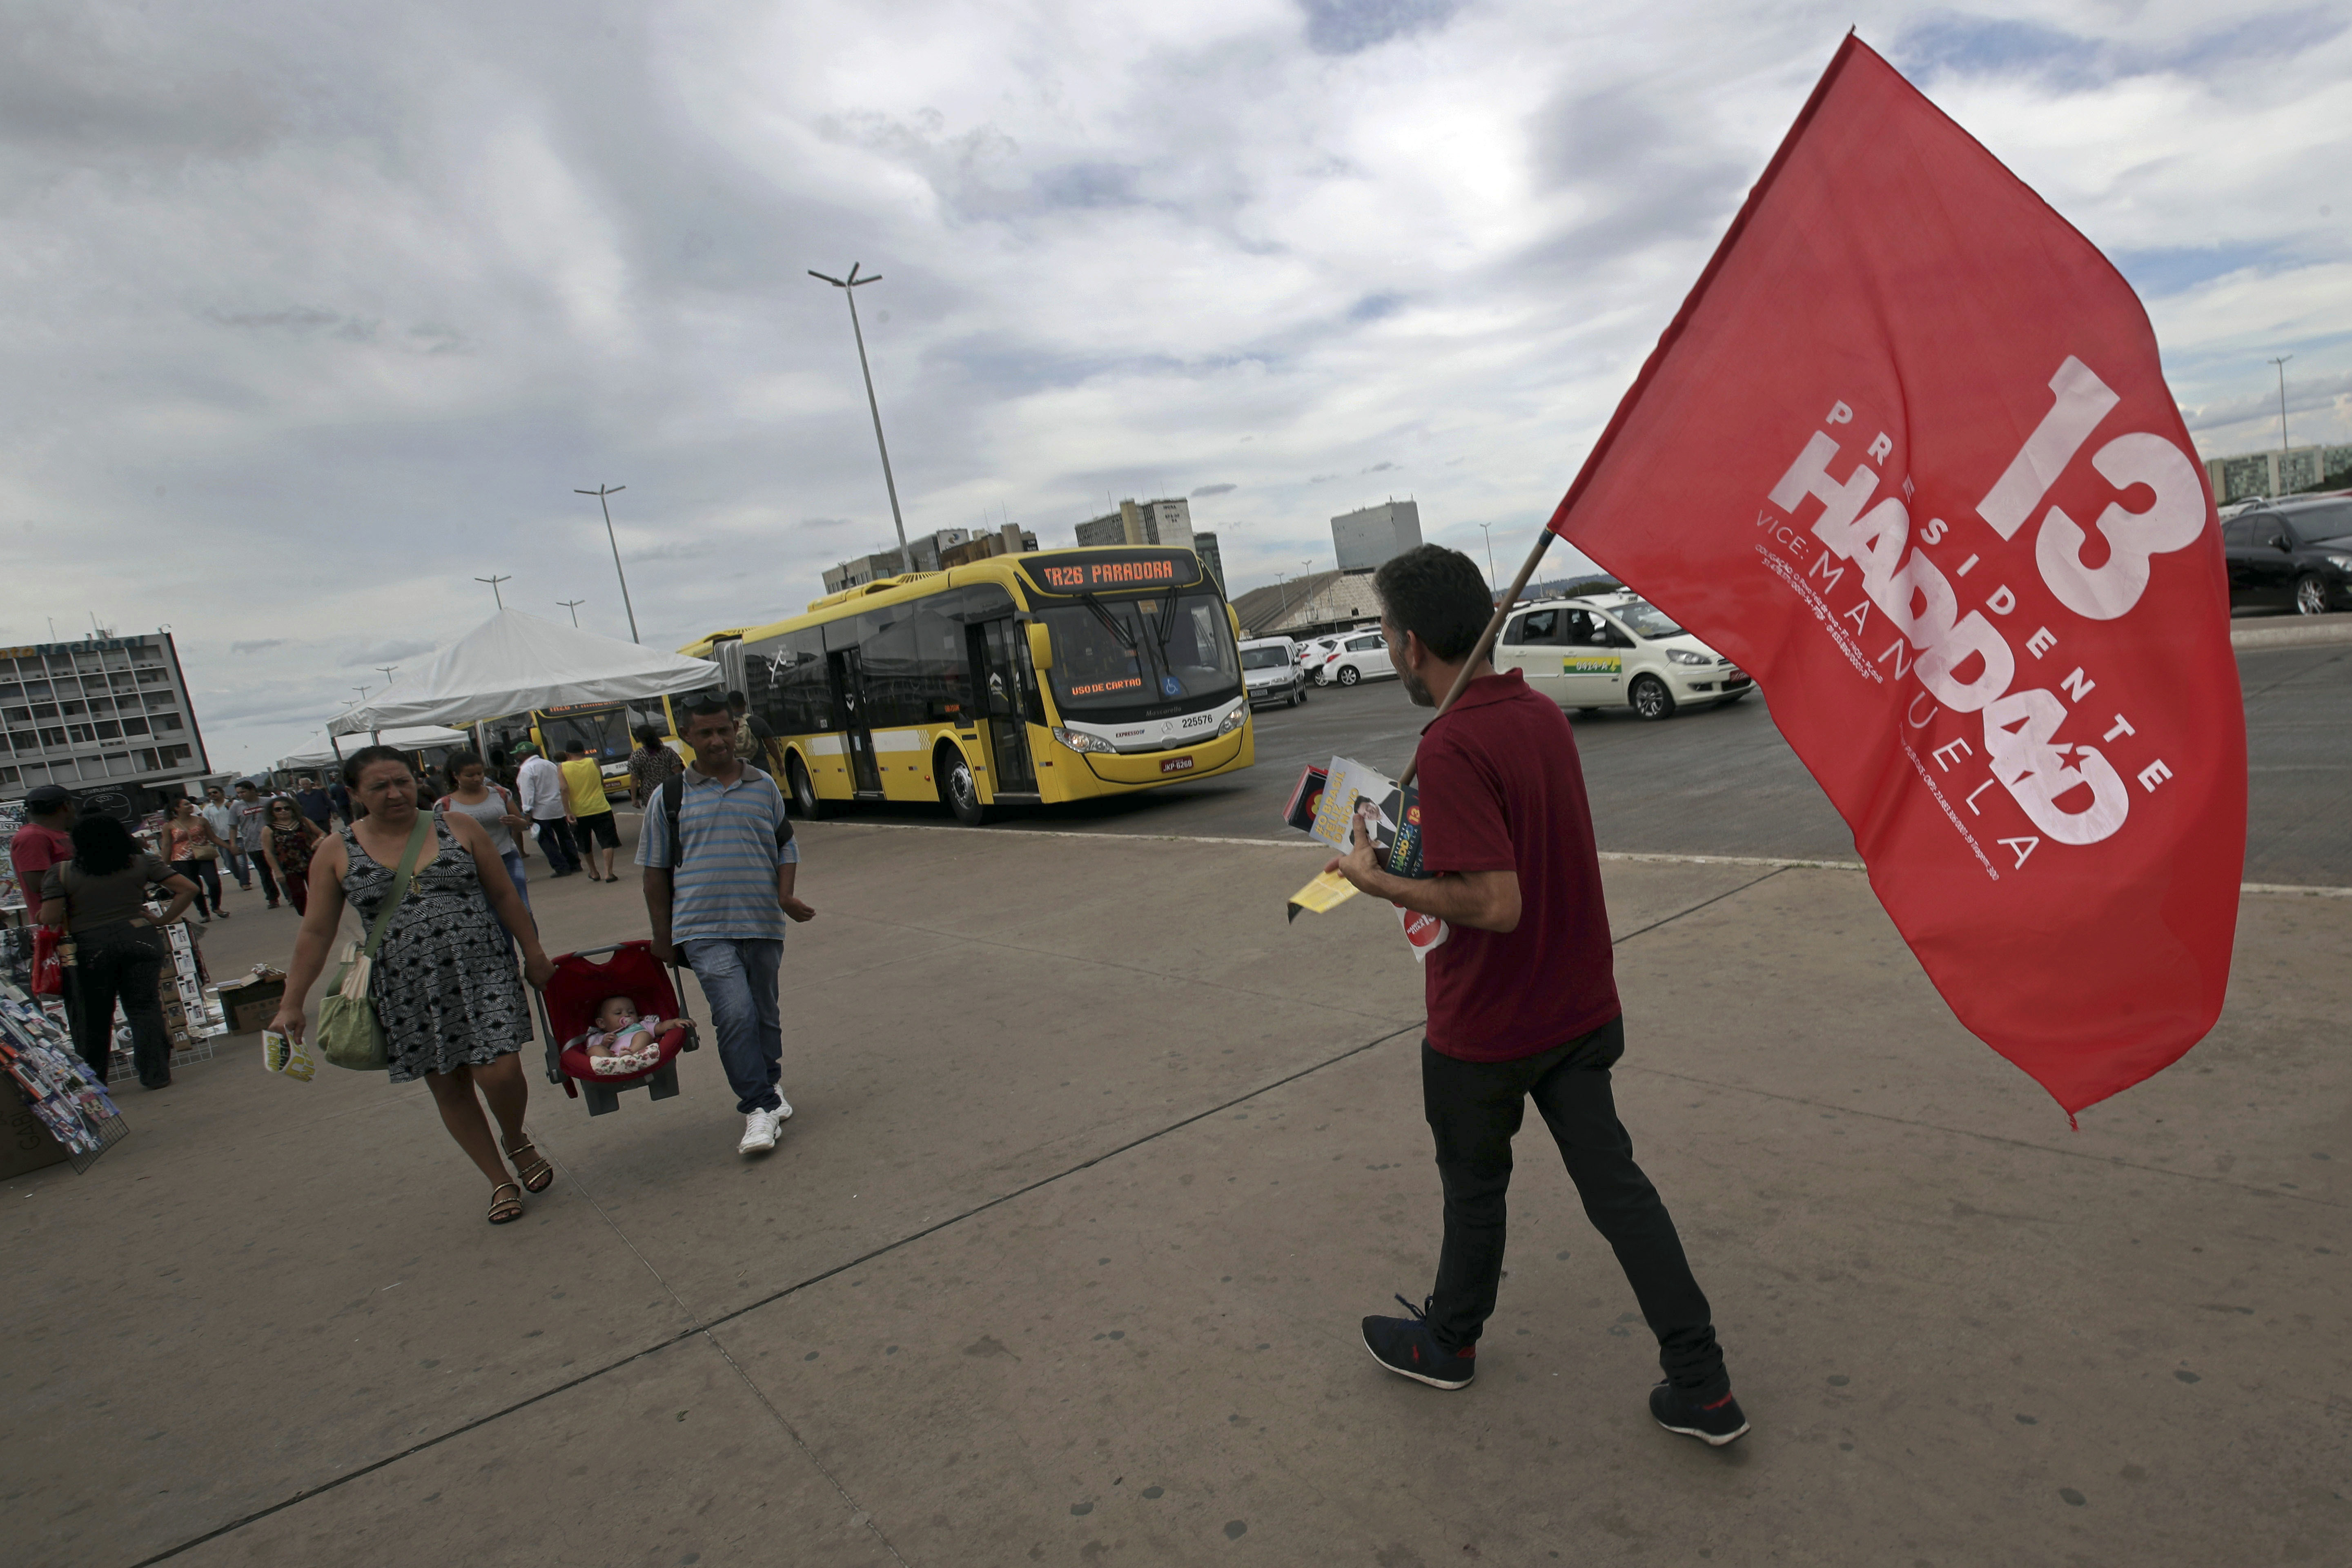 A lonely supporter of Workers' Party presidential candidate Fernando Haddad walks with a campaign flag, at a bus station in Brasília, Brazil, Wednesday, Oct. 17, 2018. Before the run-off election in Brazil on 28 October, right-wing populist presidential candidate Jair Bolsonaro is showing a clear advantage over Haddad. (AP Photo/Eraldo Peres)